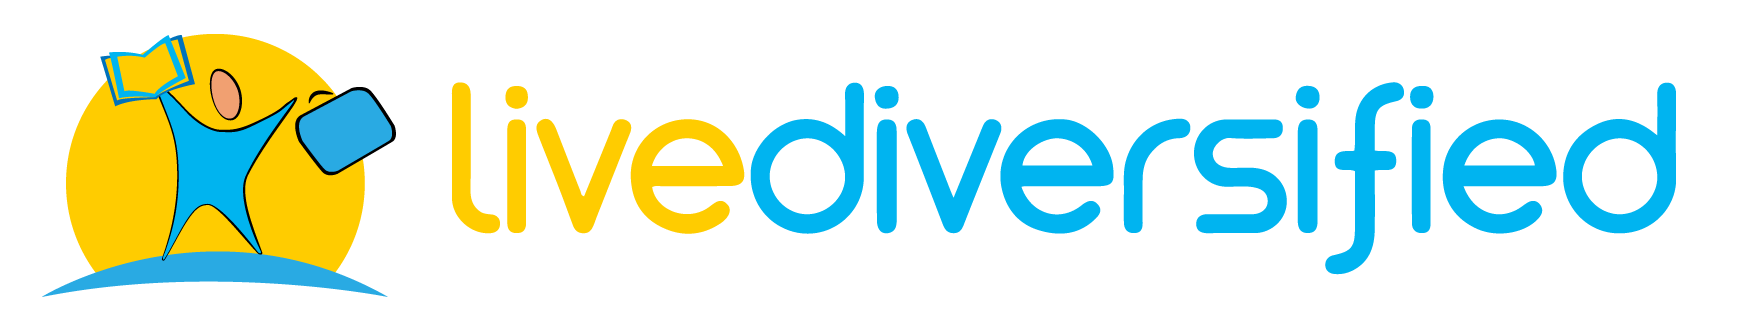 Live Diversified